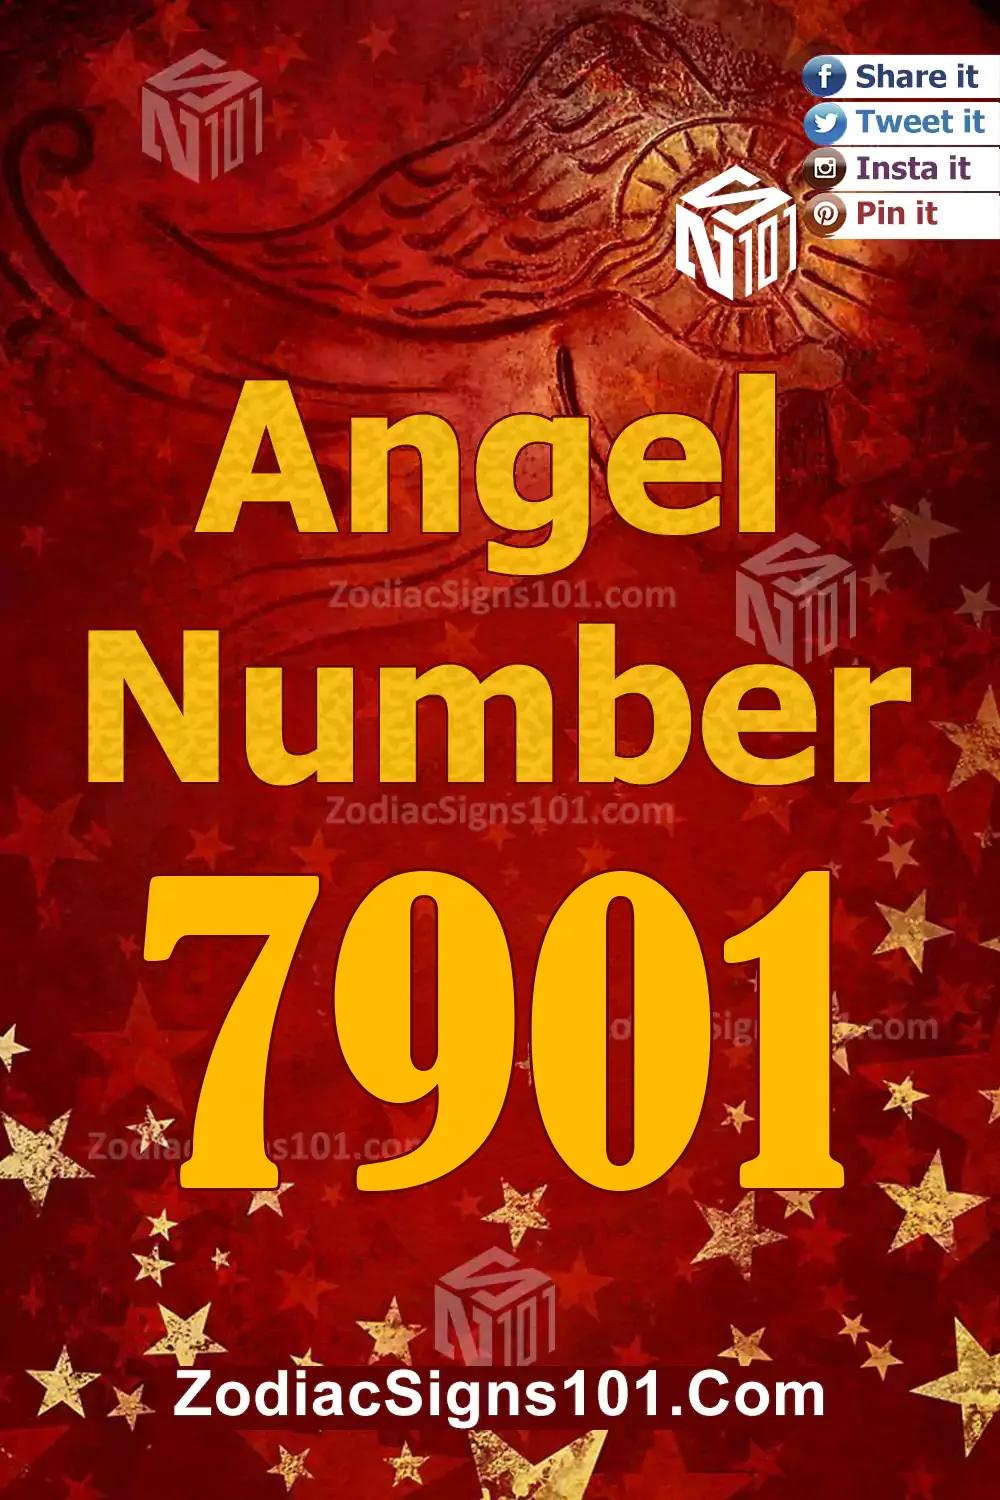 7901 Angel Number Meaning